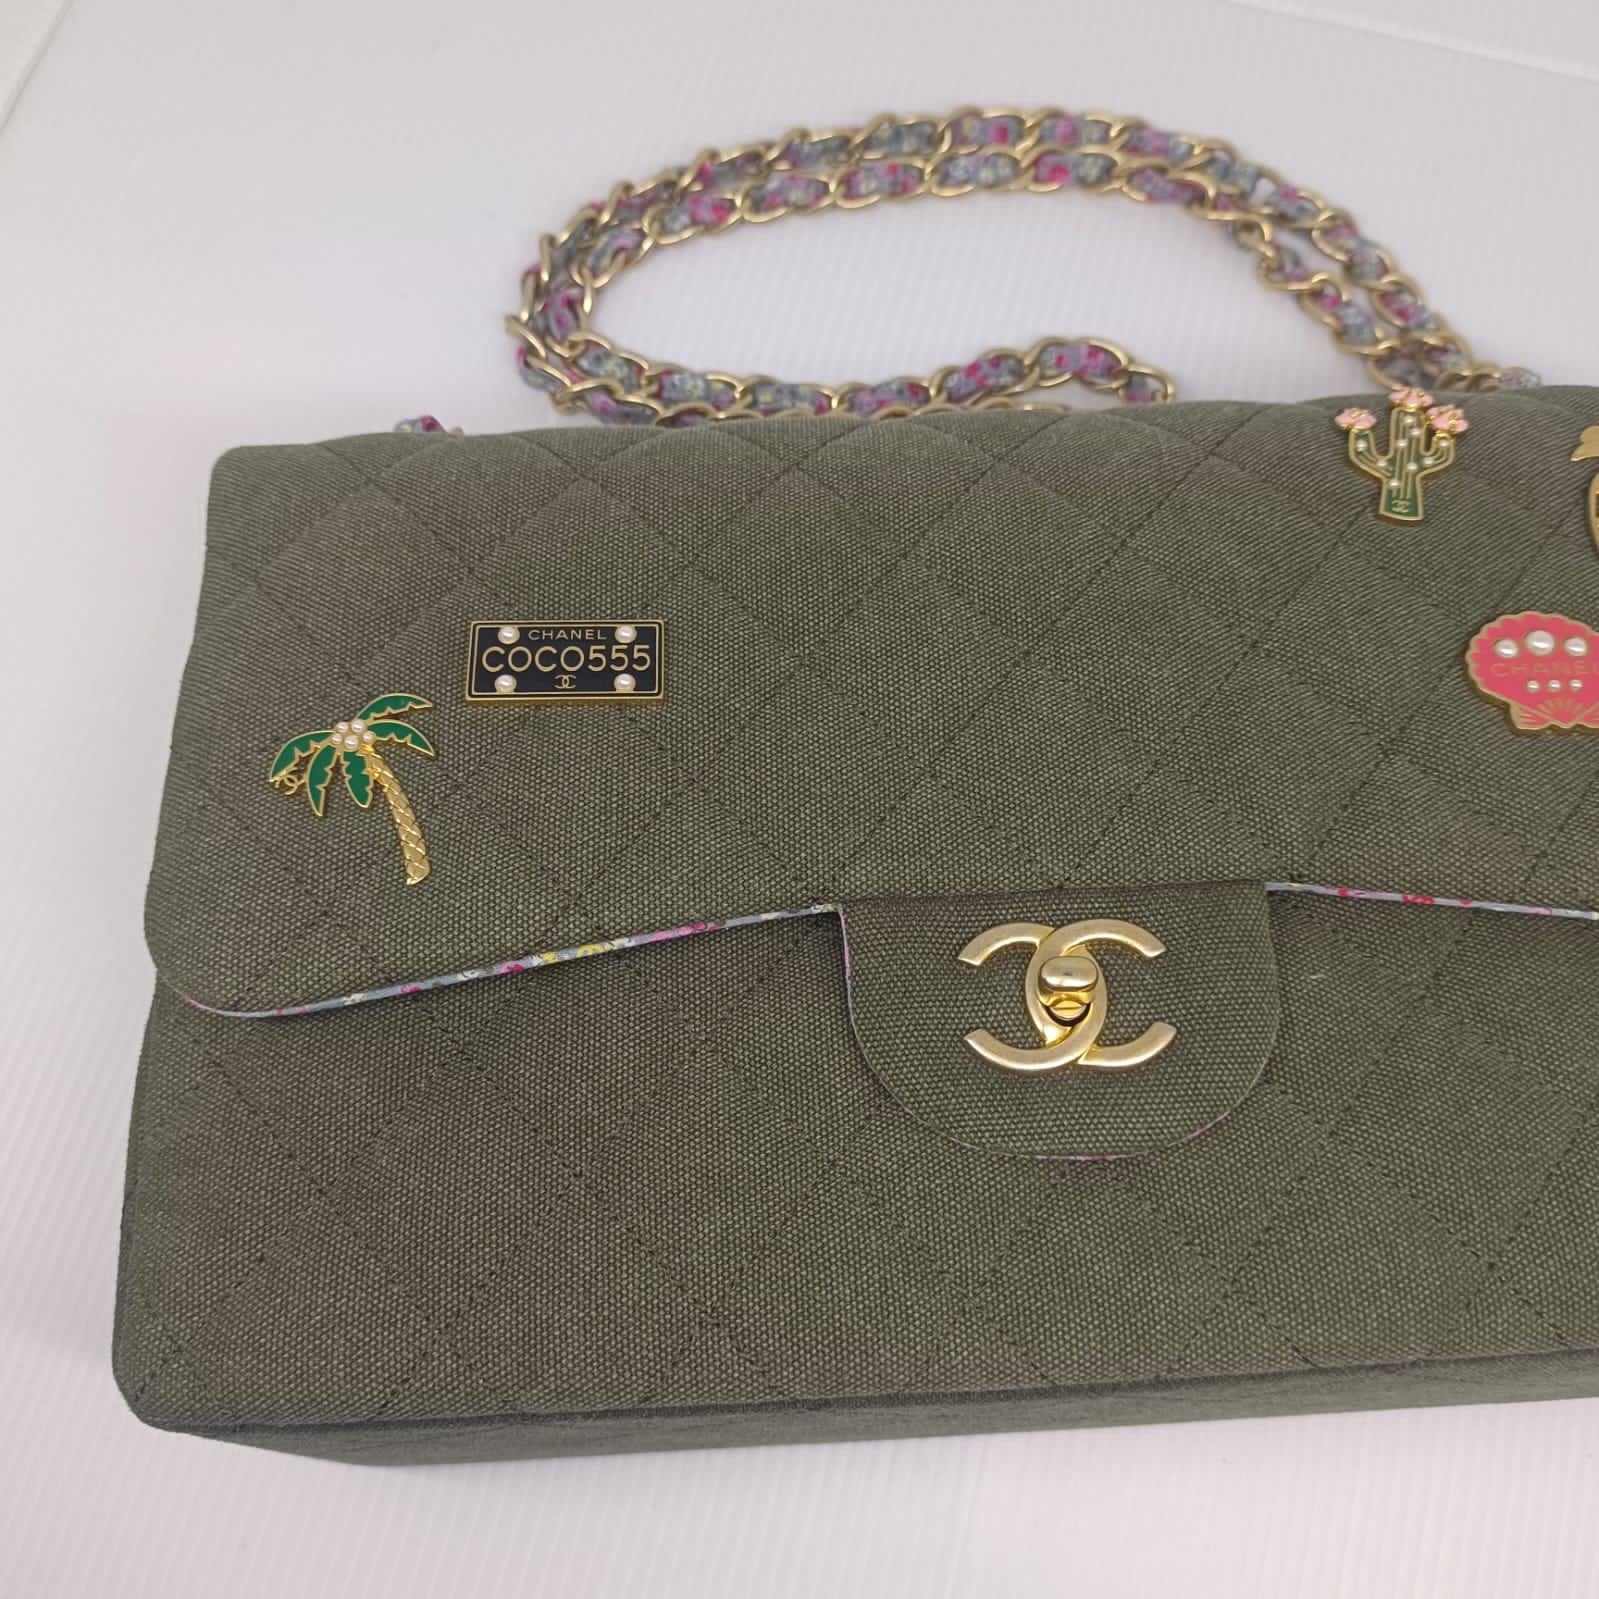 Beautiful jumbo cuba charm in olive green color with gold hardware. Excellent condition, very minimal scuffs on the exterior. Material is denim-like fabric. Lining is beautiful floral print fabric. There is one missing pearl on the pineapple